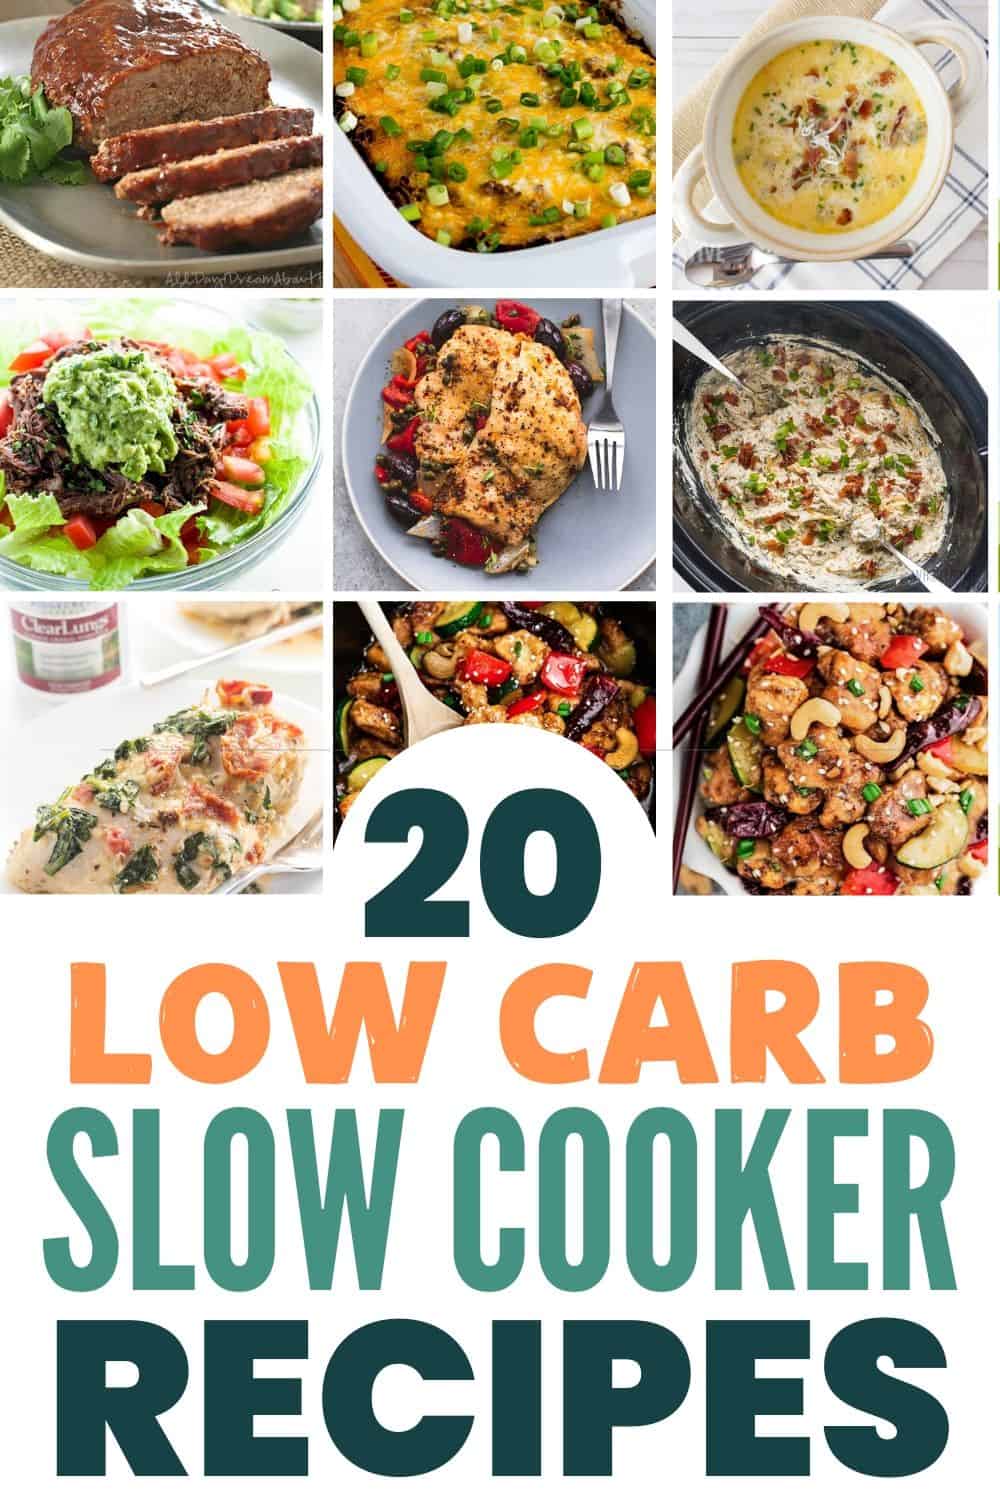 20 Low-Carb Slow Cooker Recipes for Healthy & Easy Dinners